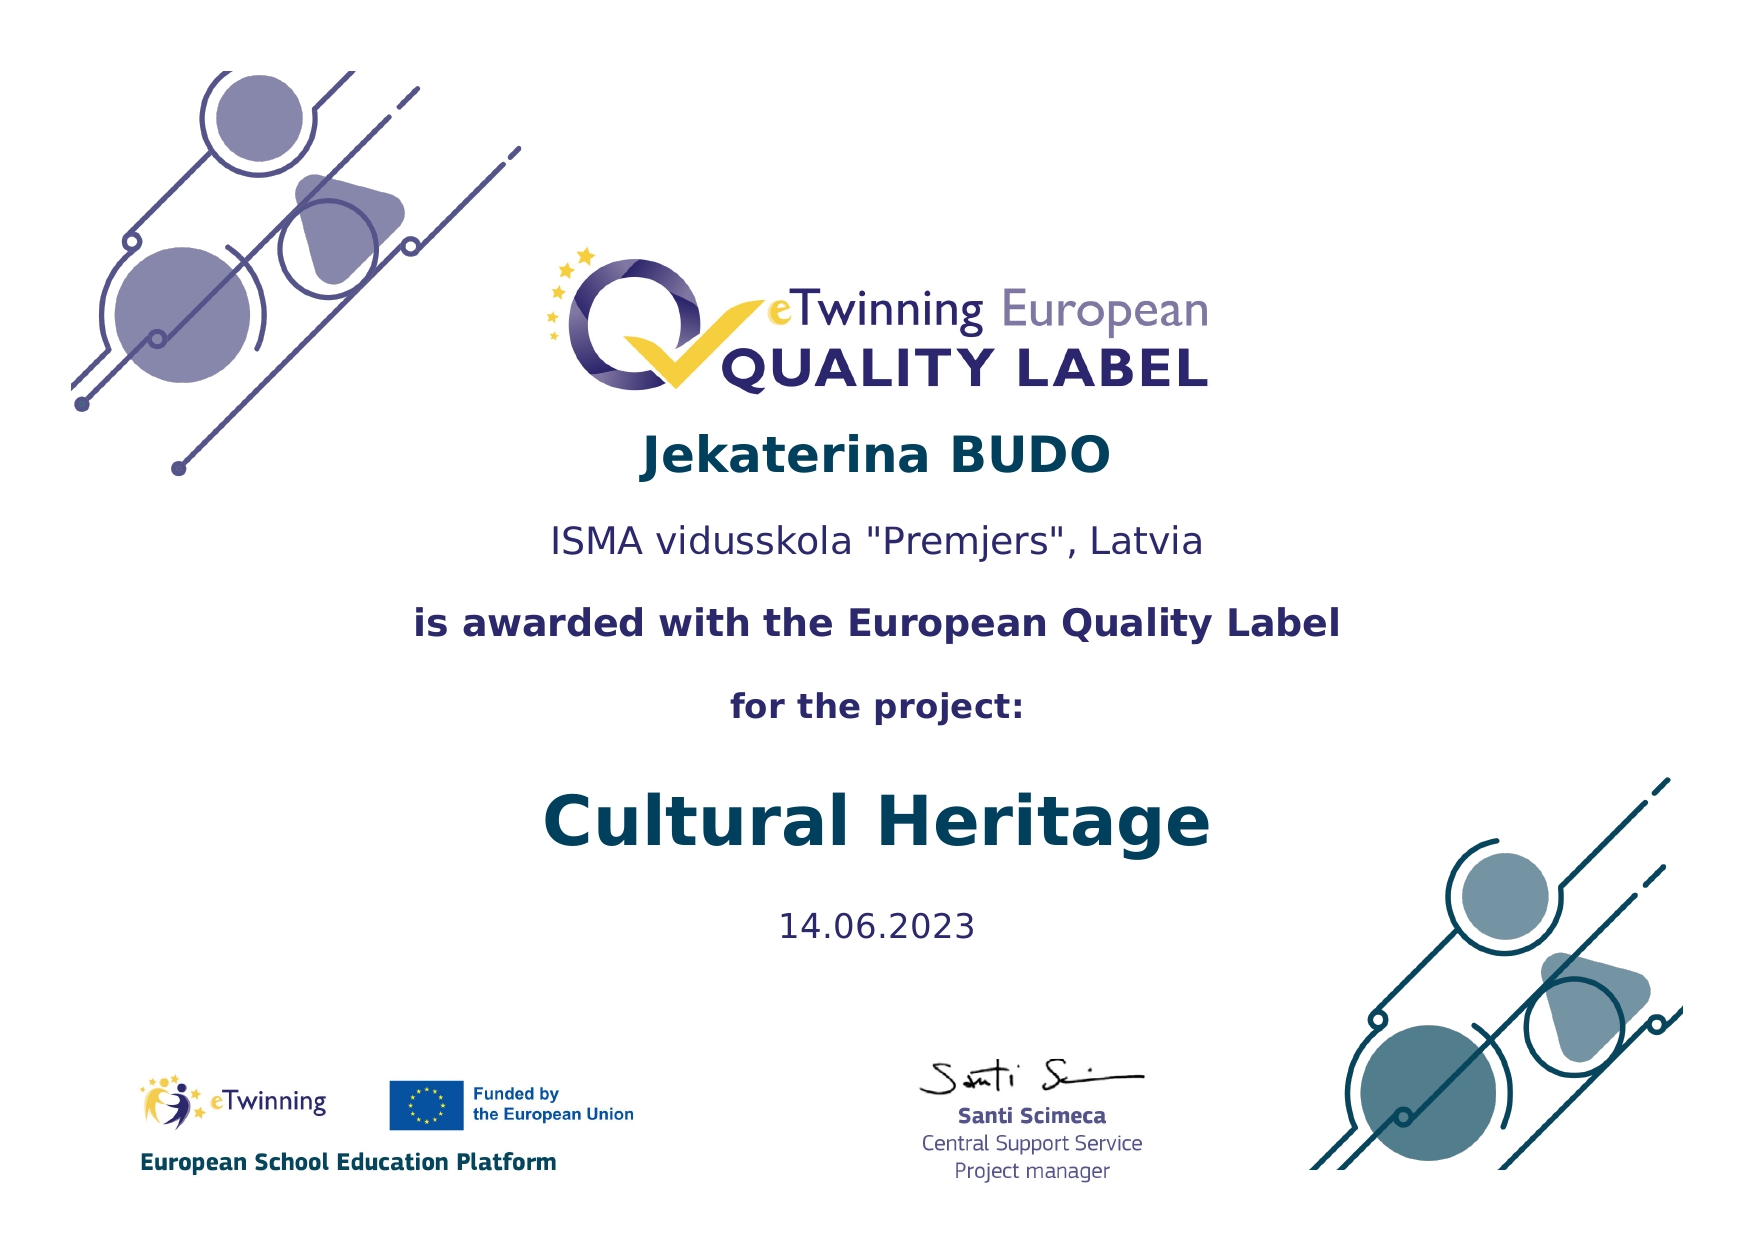 Project “Cultural Heritage” has been awarded